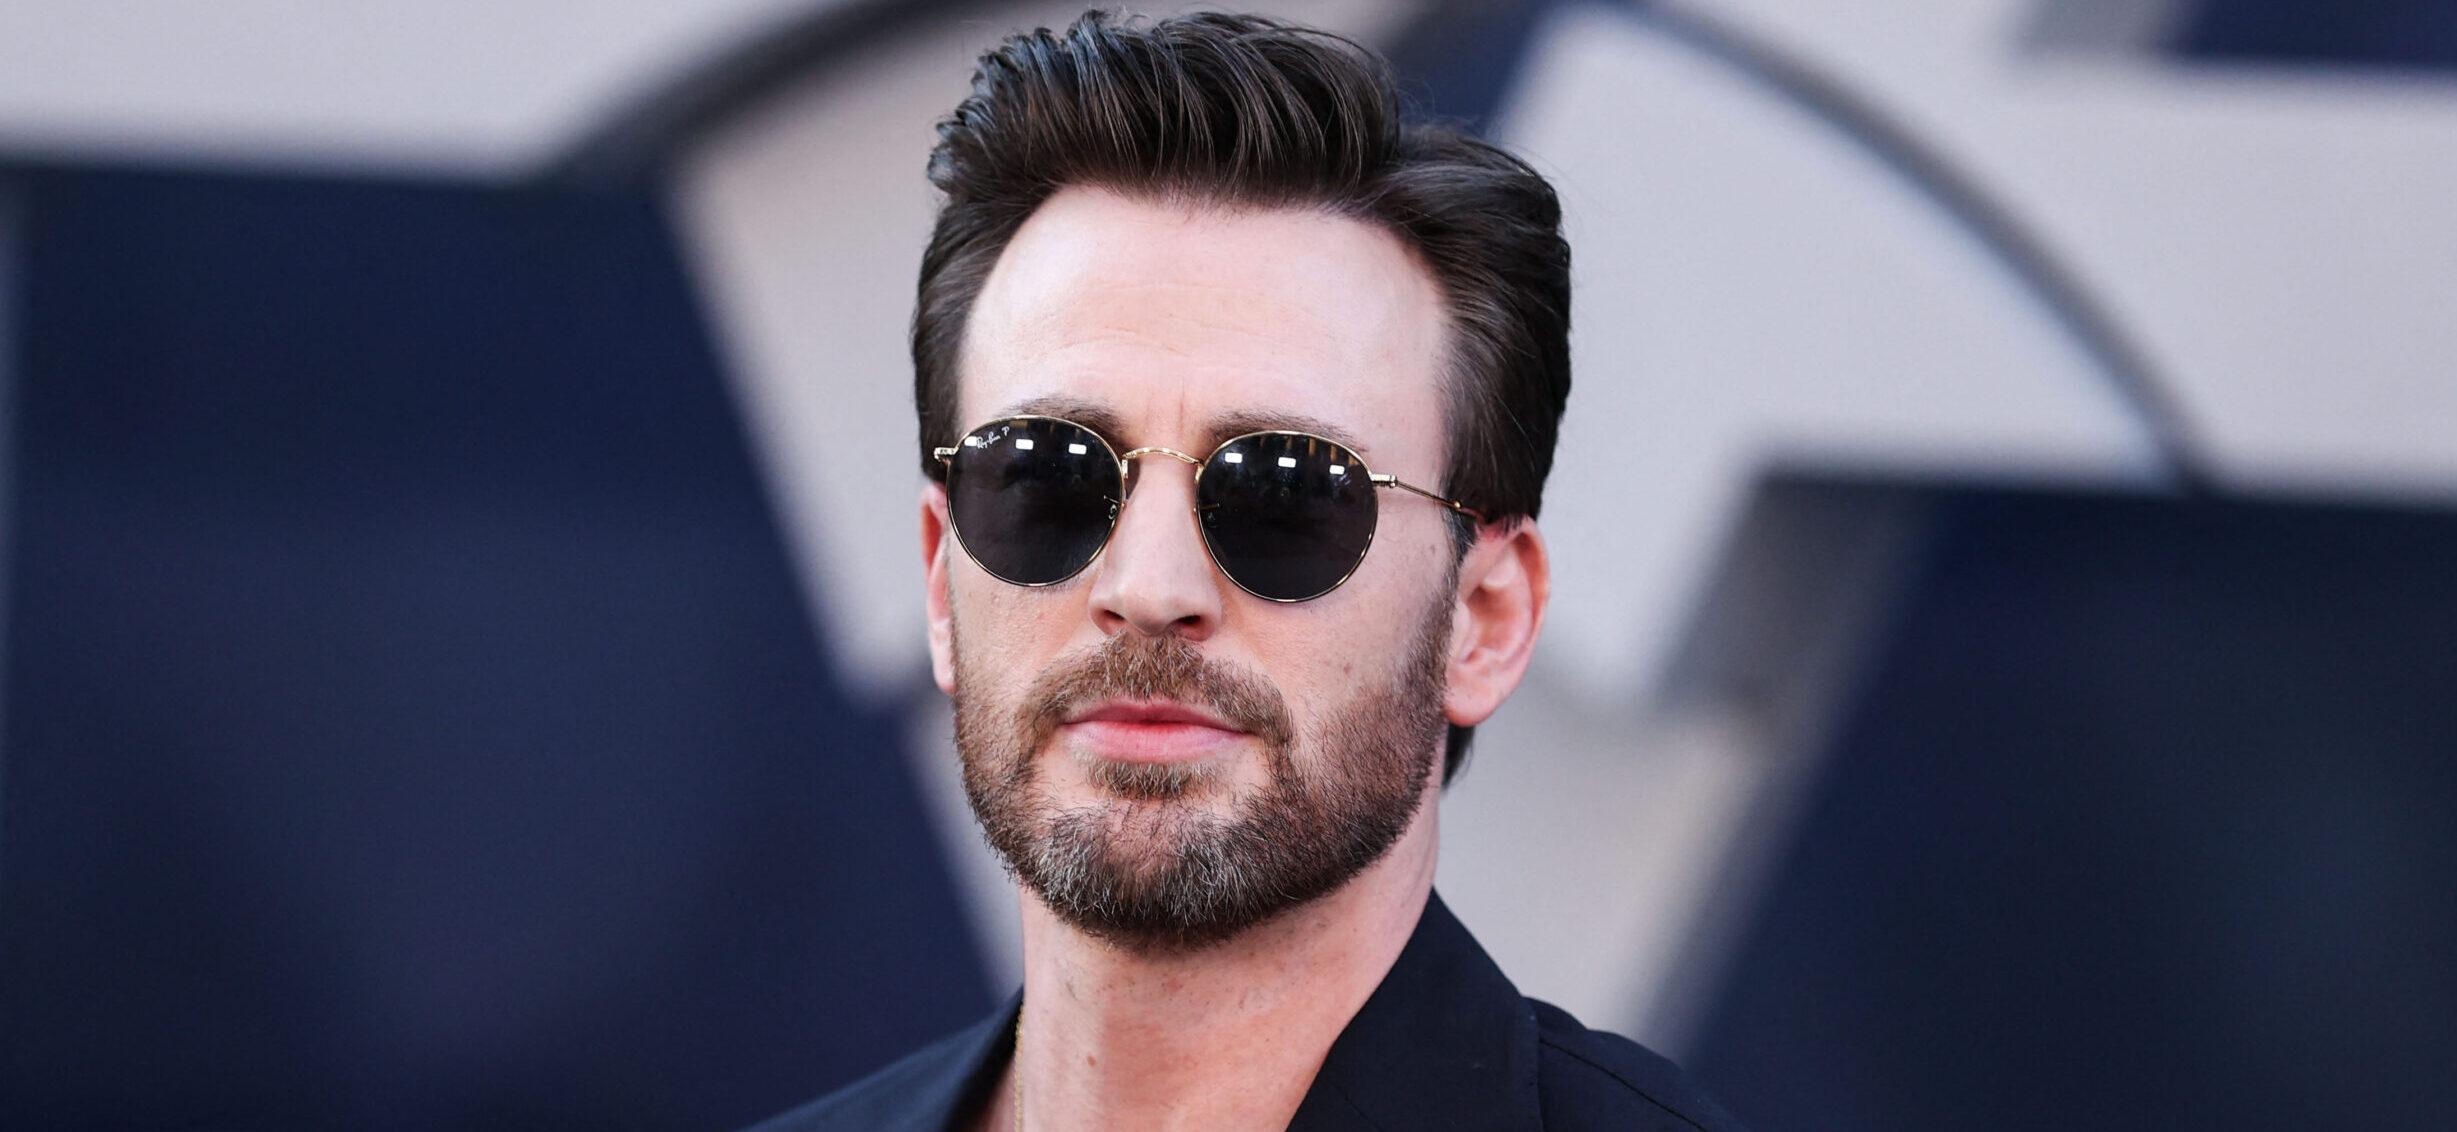 Chris Evans Agrees To Instagram Being An ‘Impediment’ To His Career As He Takes ‘A Little Break’